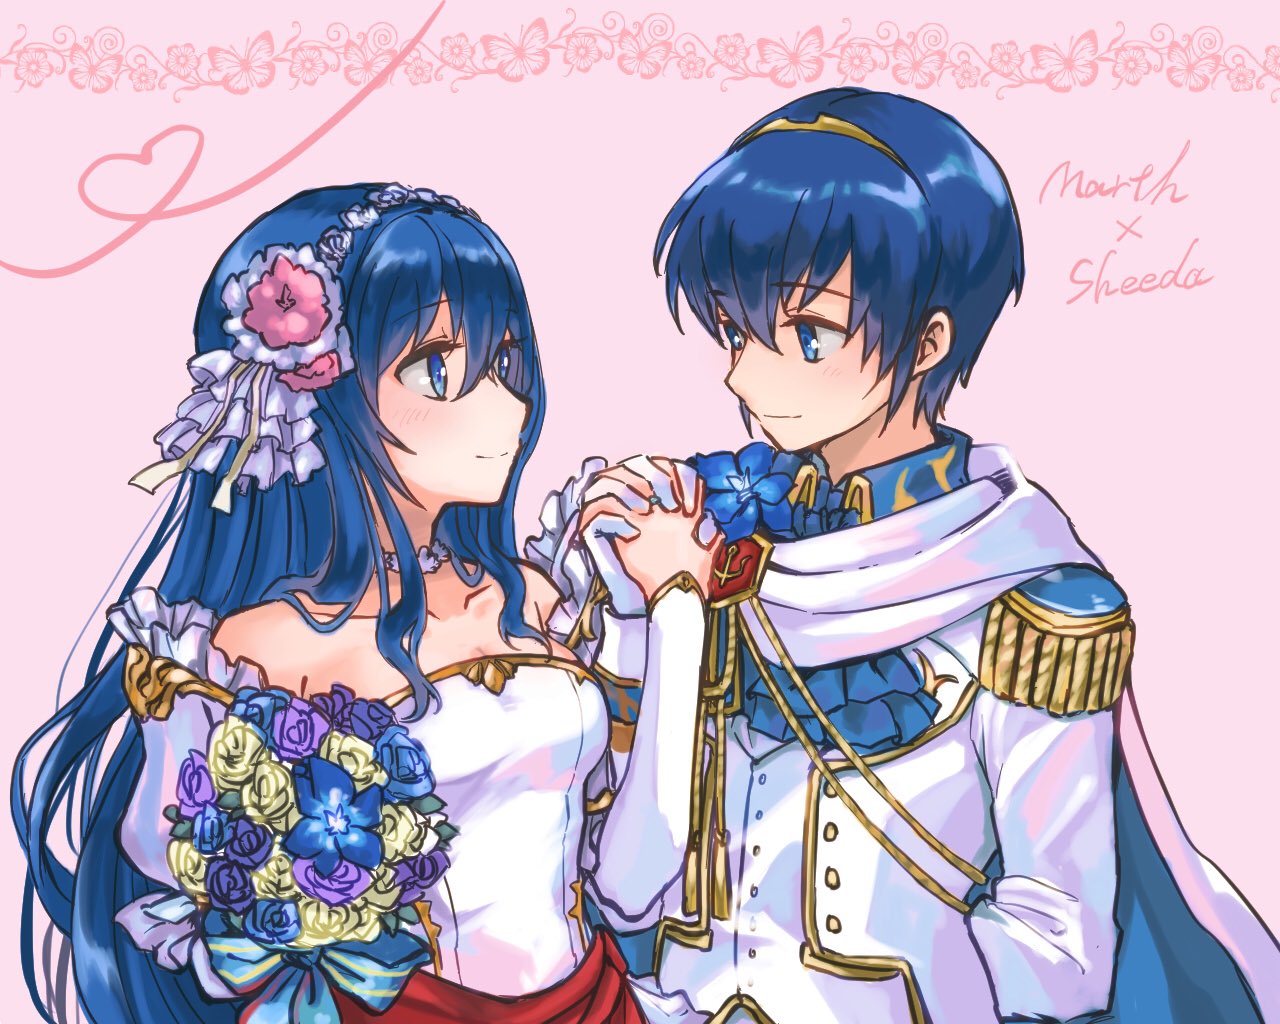 1boy 1girl bare_shoulders blue_eyes blue_hair blush bride couple cute dress elbow_gloves fire_emblem fire_emblem:_mystery_of_the_emblem fire_emblem_heroes fire_emblem_musou formal gloves hair_ornament hetero husband_and_wife intelligent_systems jewelry kumakosion long_hair love marth necklace nintendo sheeda short_hair simple_background smile strapless suit super_smash_bros. tiara wedding_dress white_dress white_gloves